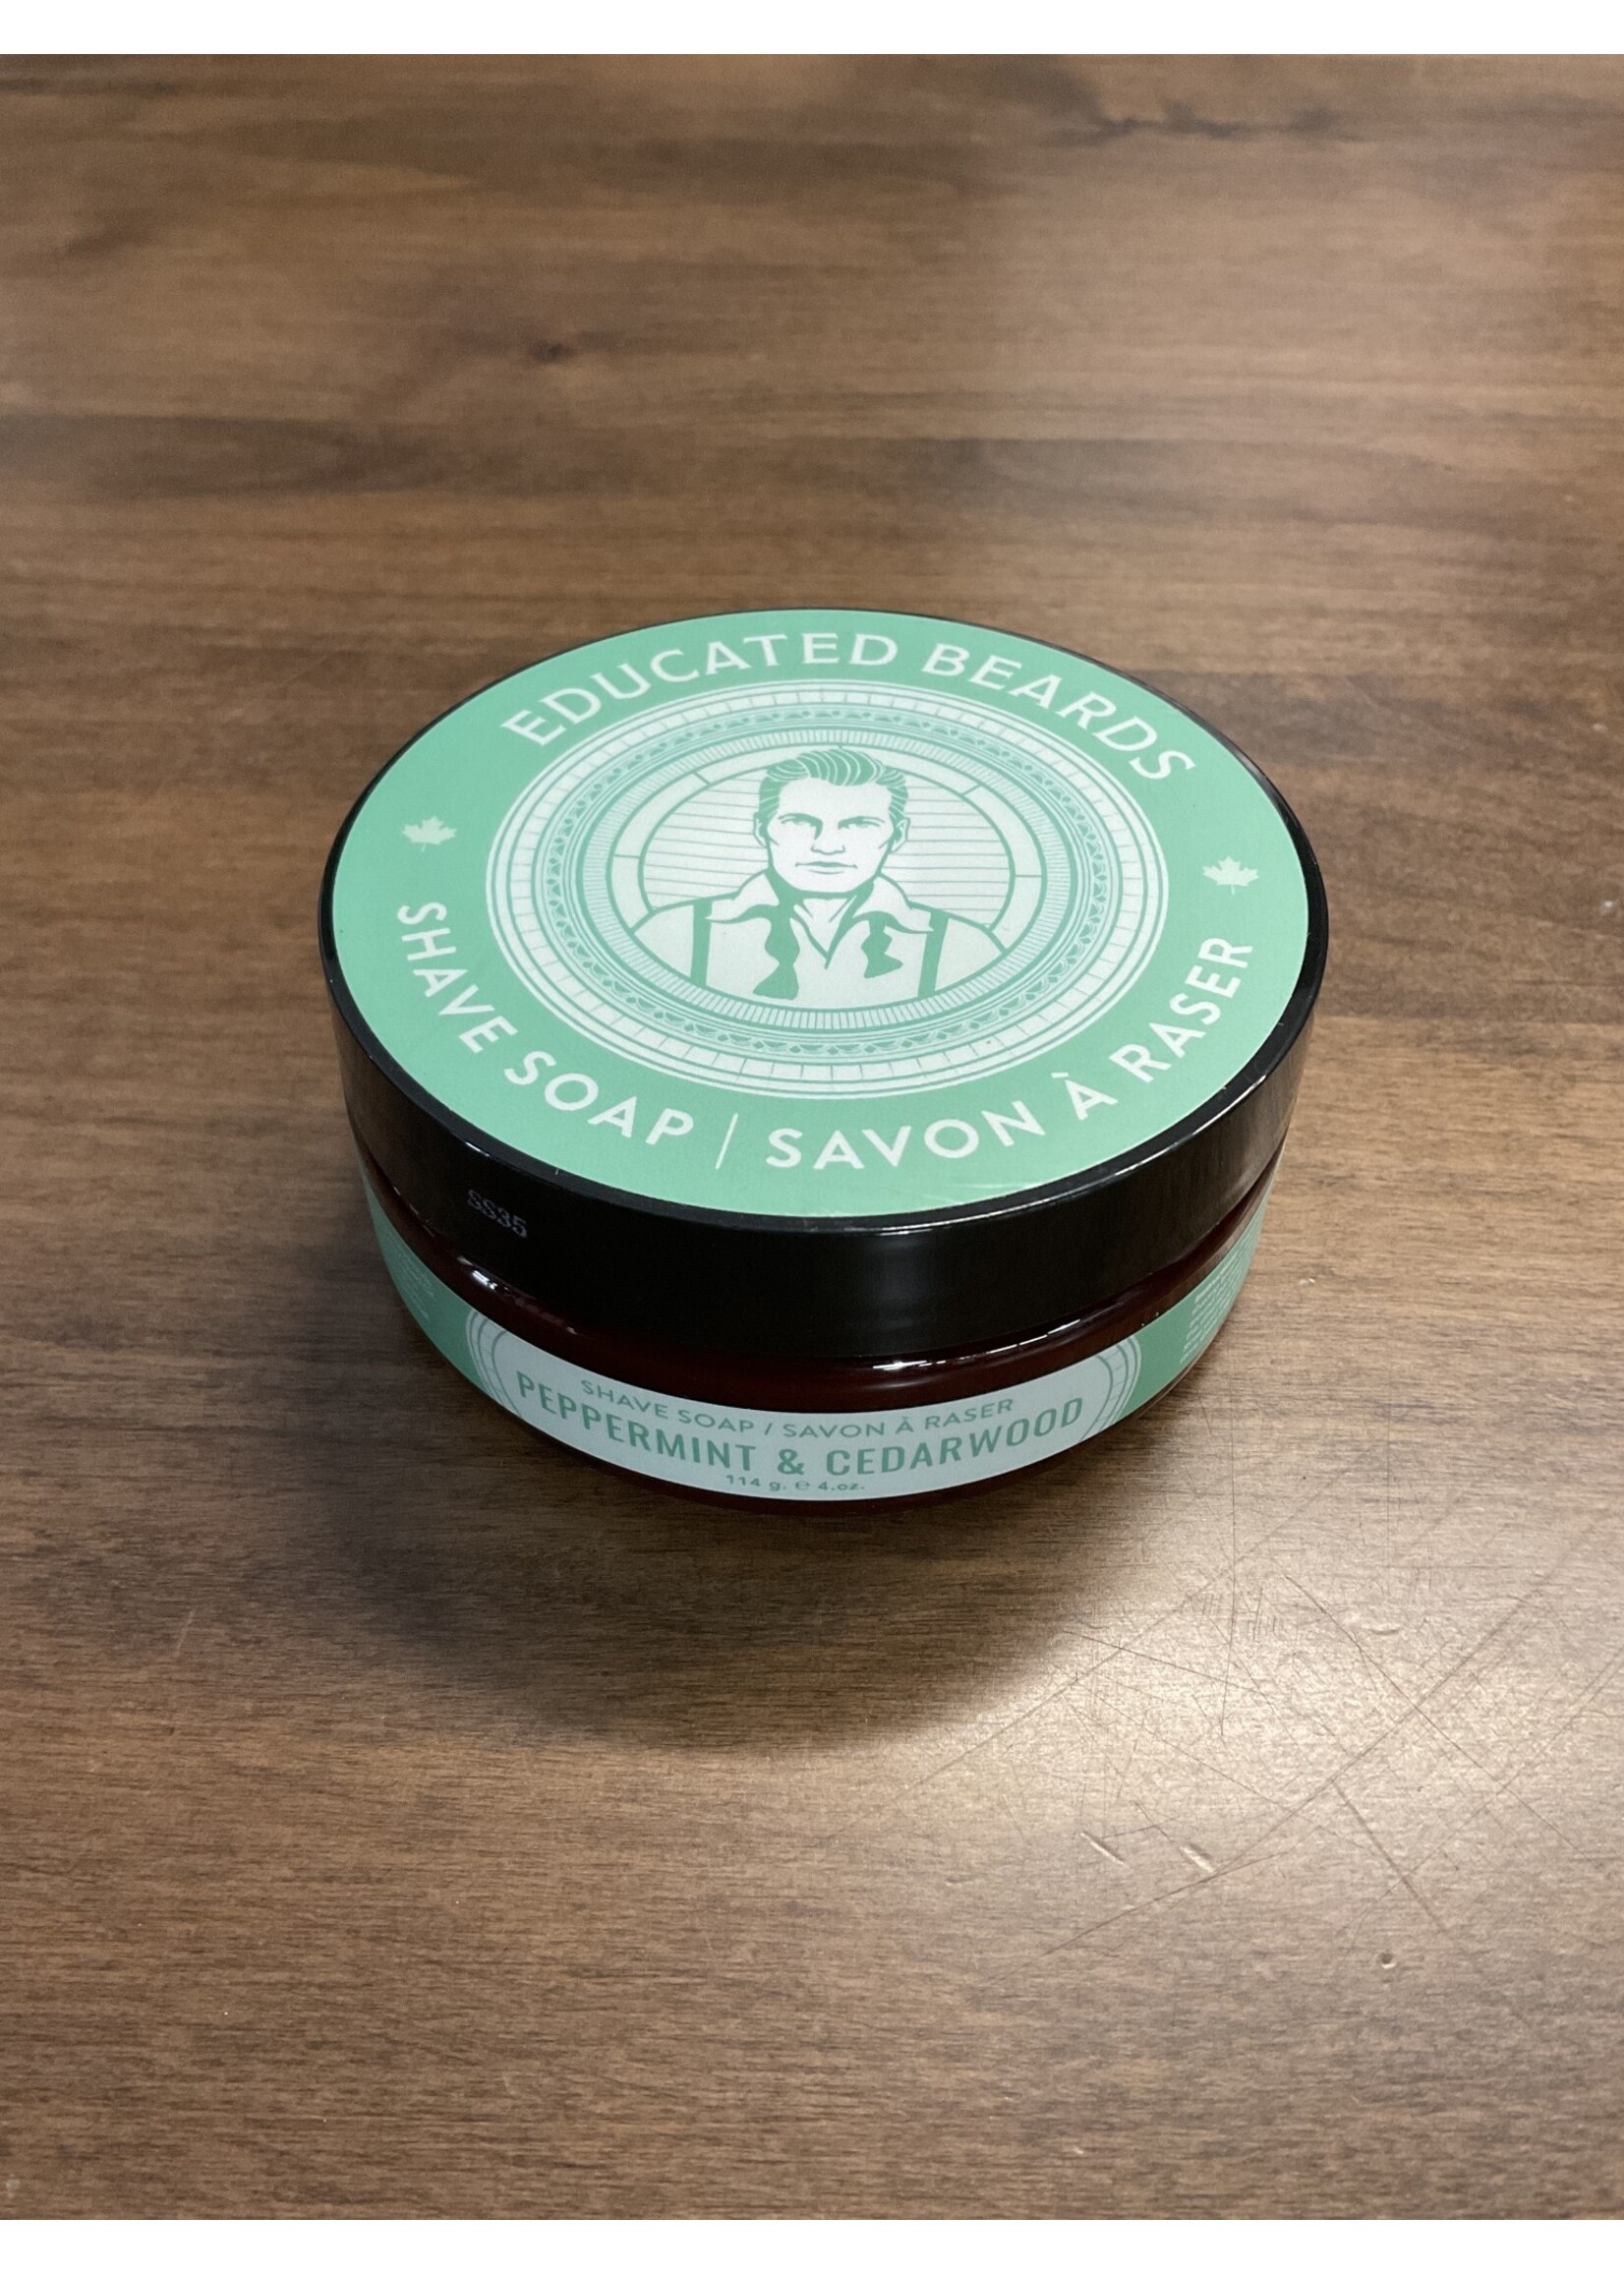 Educated Beards Shave Soap